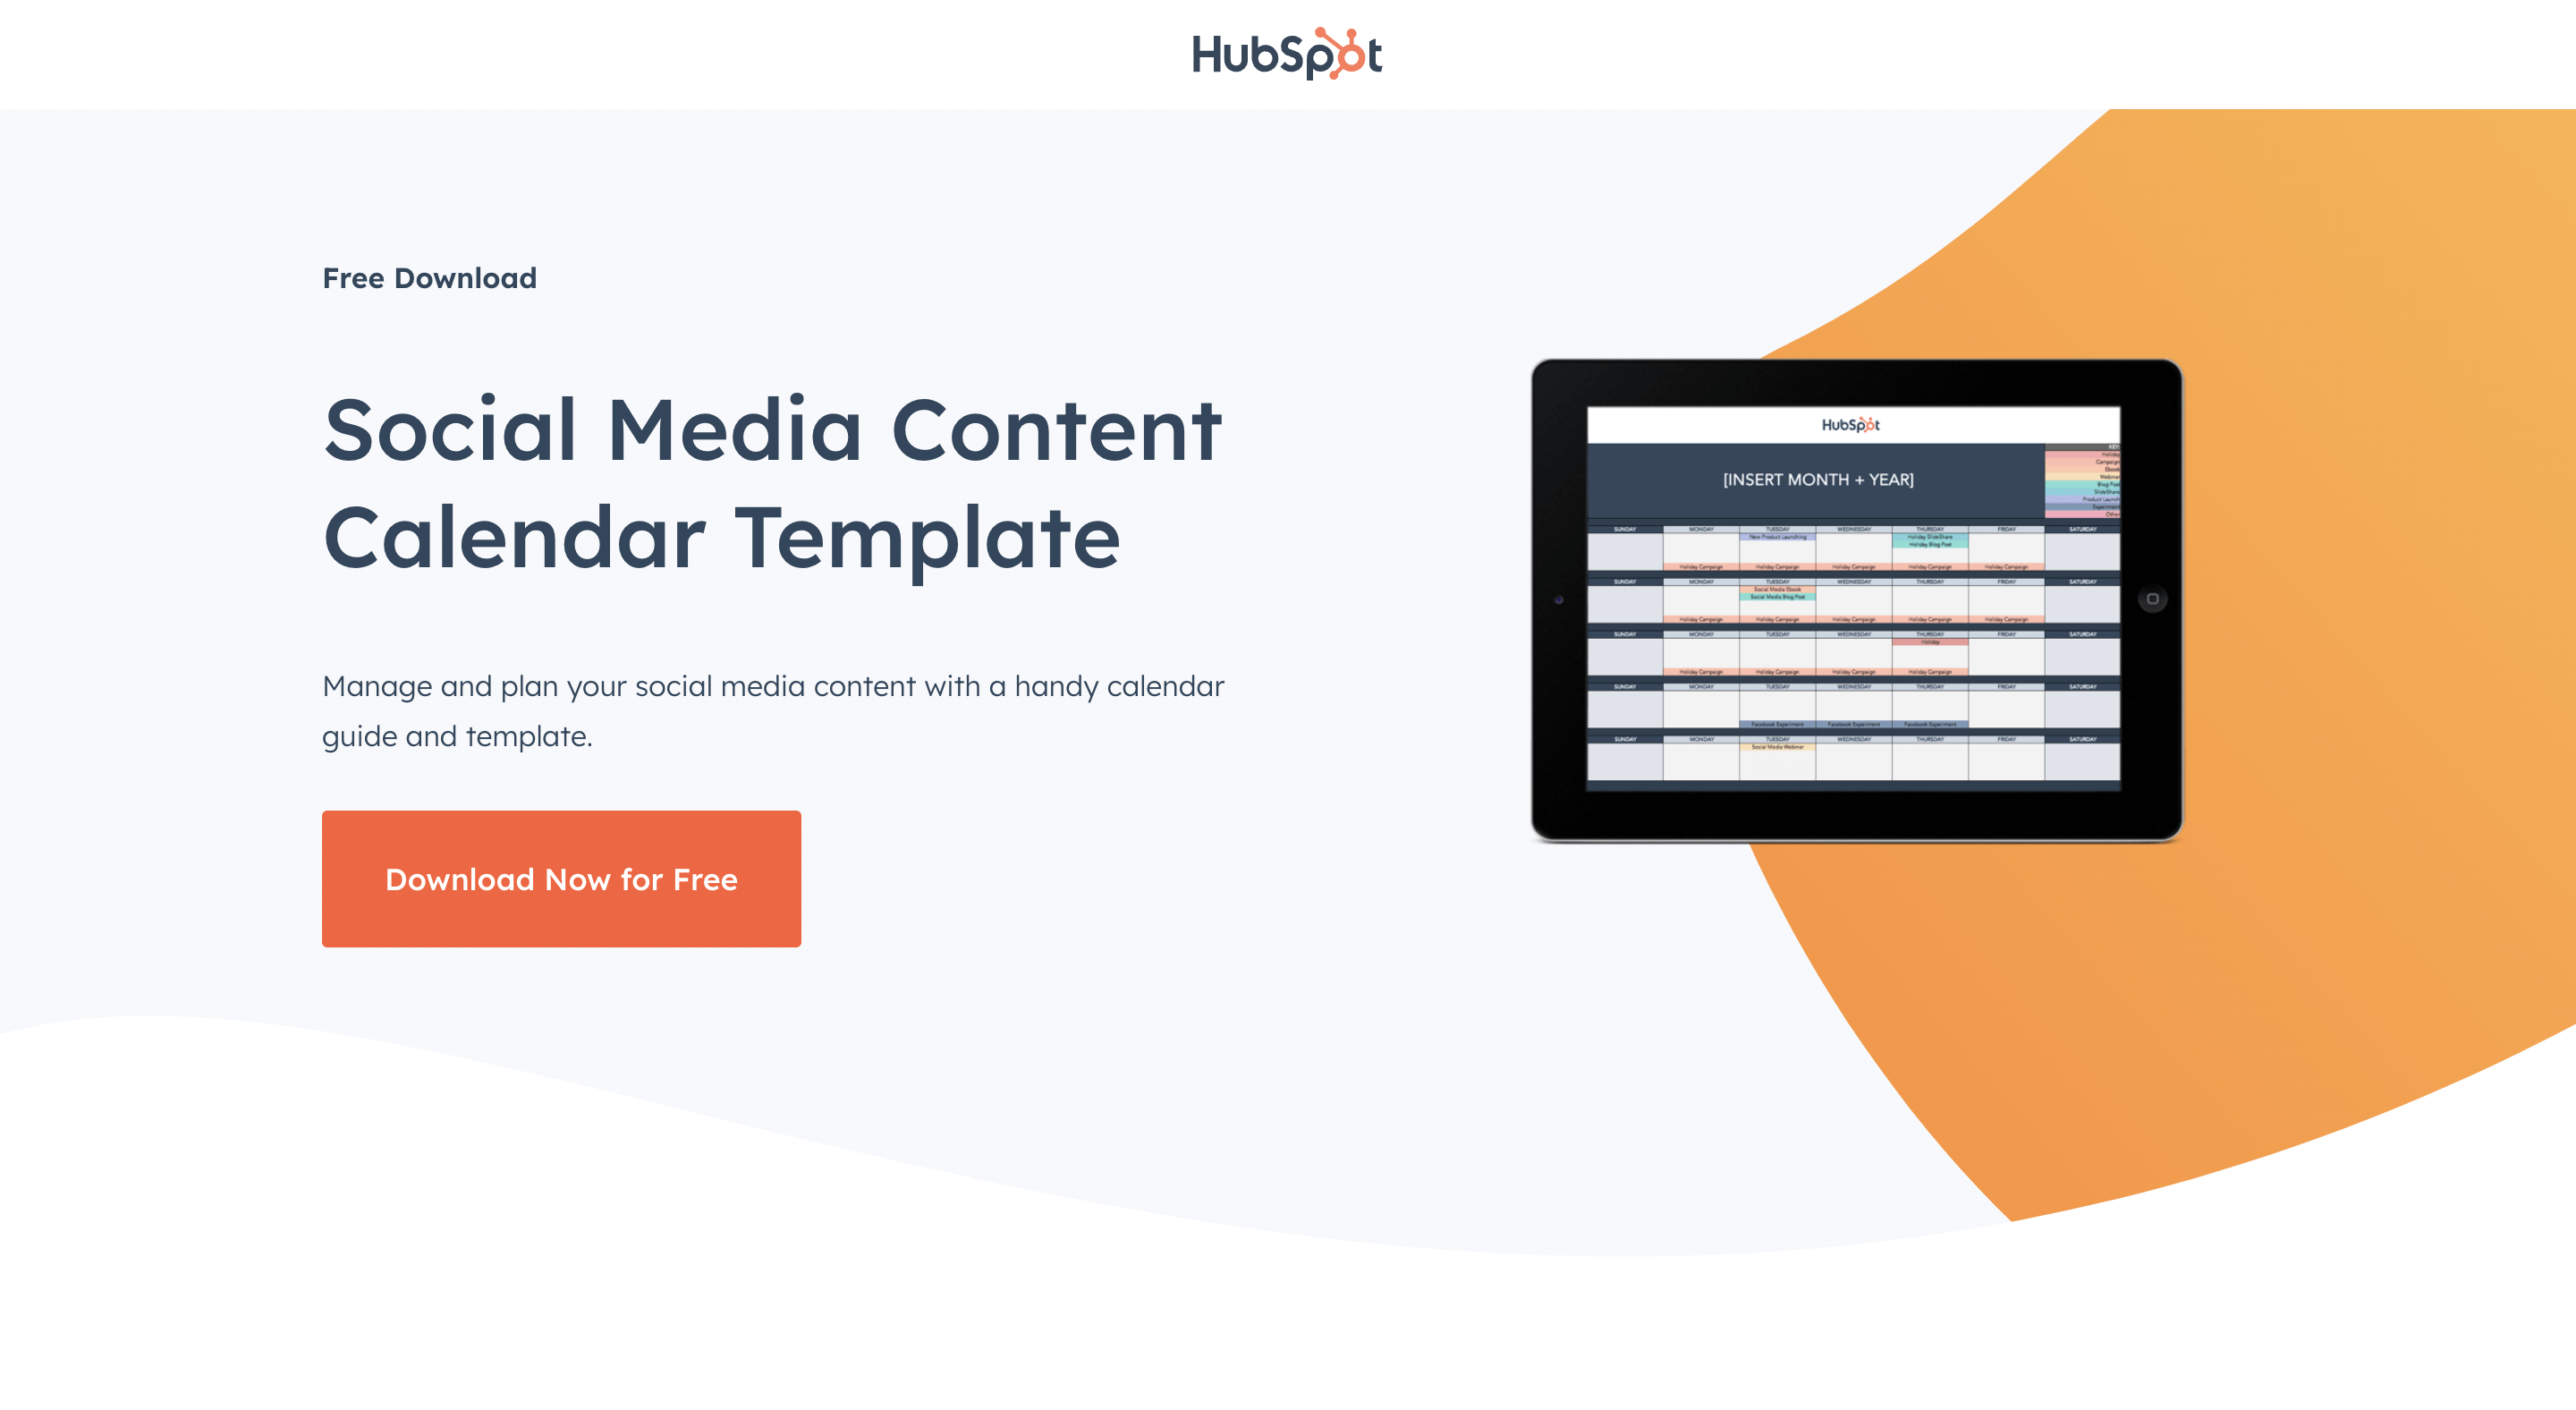 SaaS Lead Magnets: Screenshot of HubSpot's content calendar template lead magnet signup page